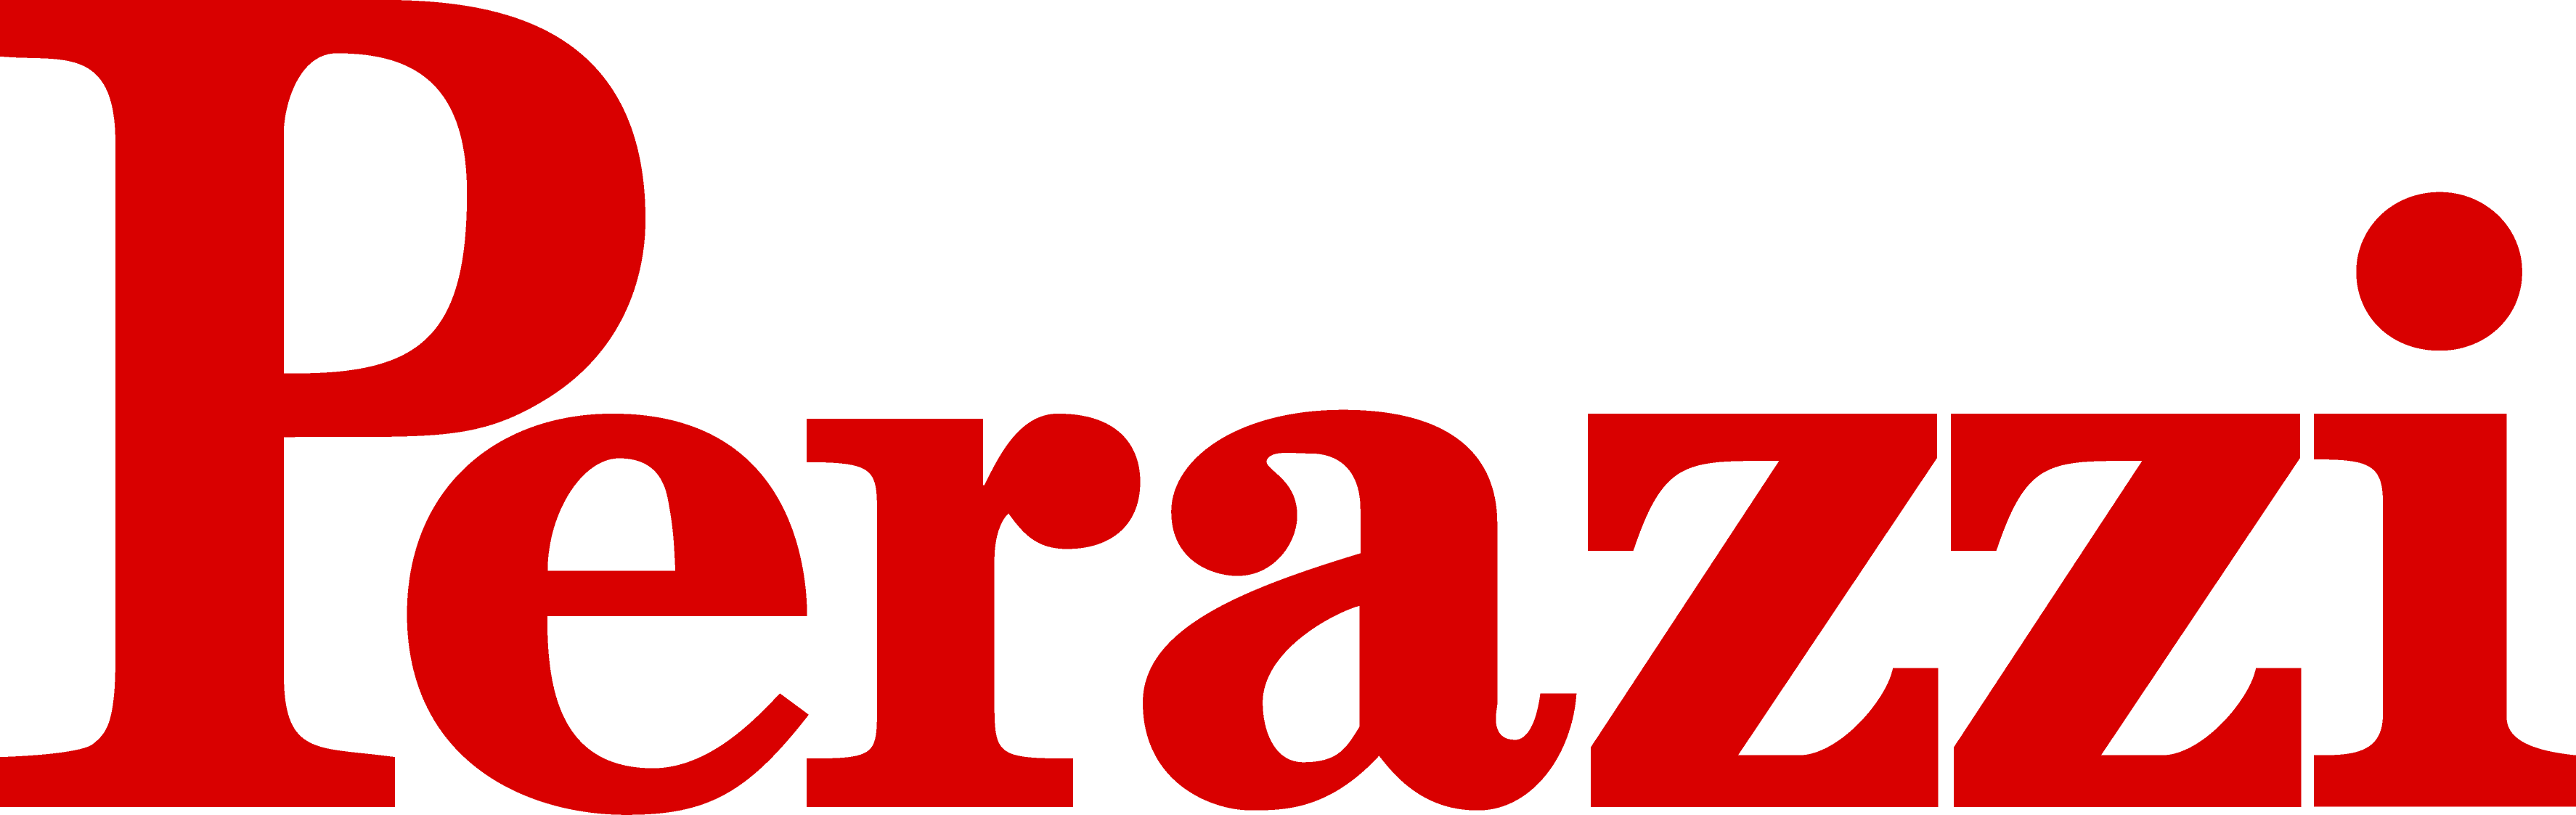 Our Friends/Our Friends - Perazzi Logo.png